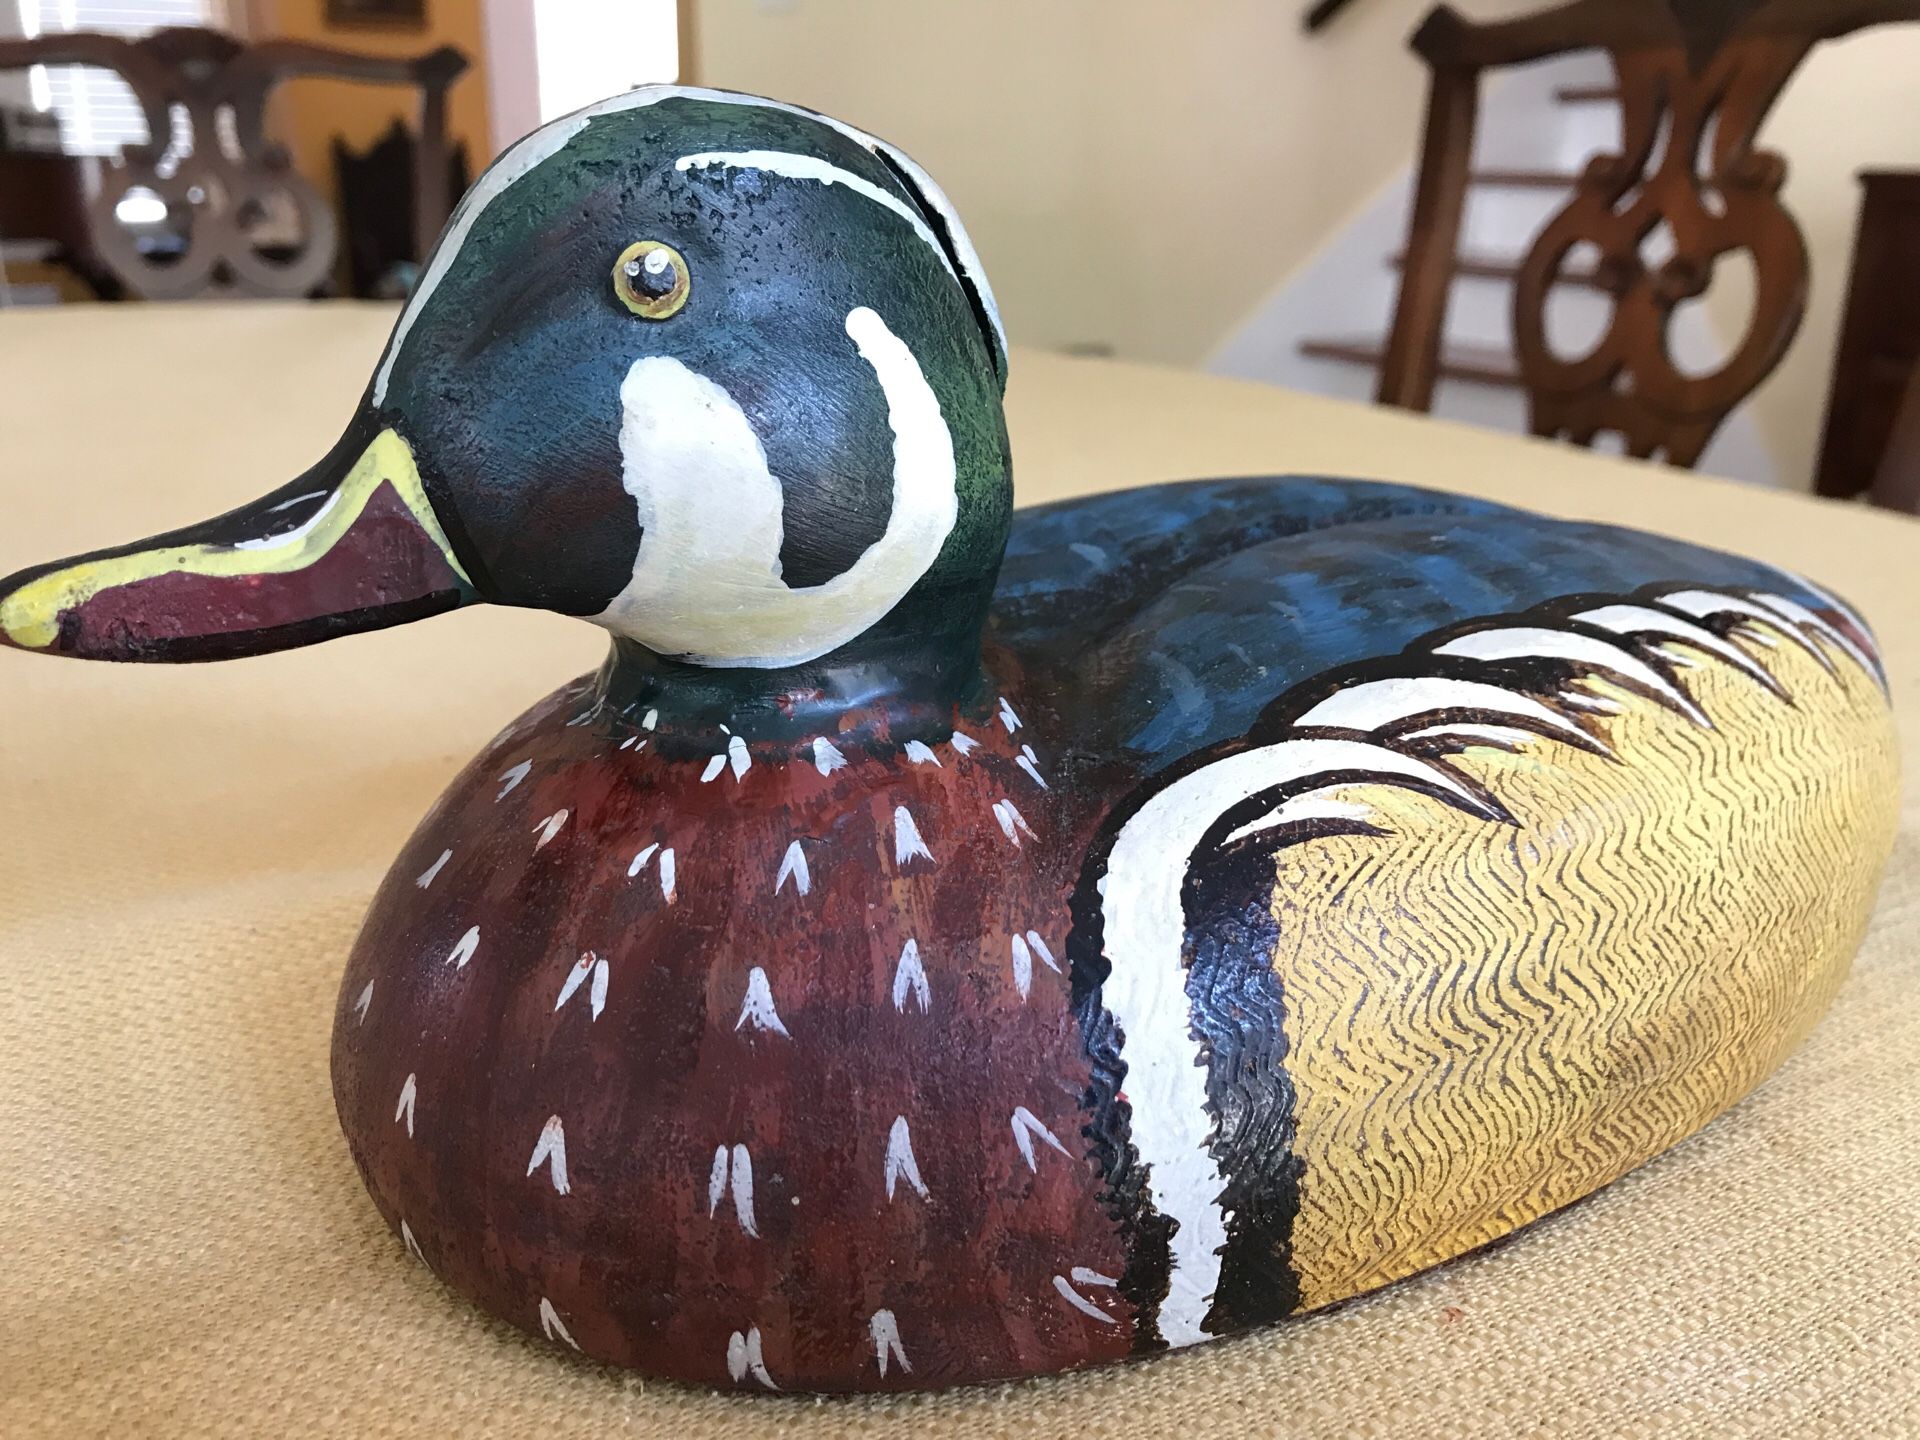 Vintage carved wood colorful Duck statue signed and dated by the artist